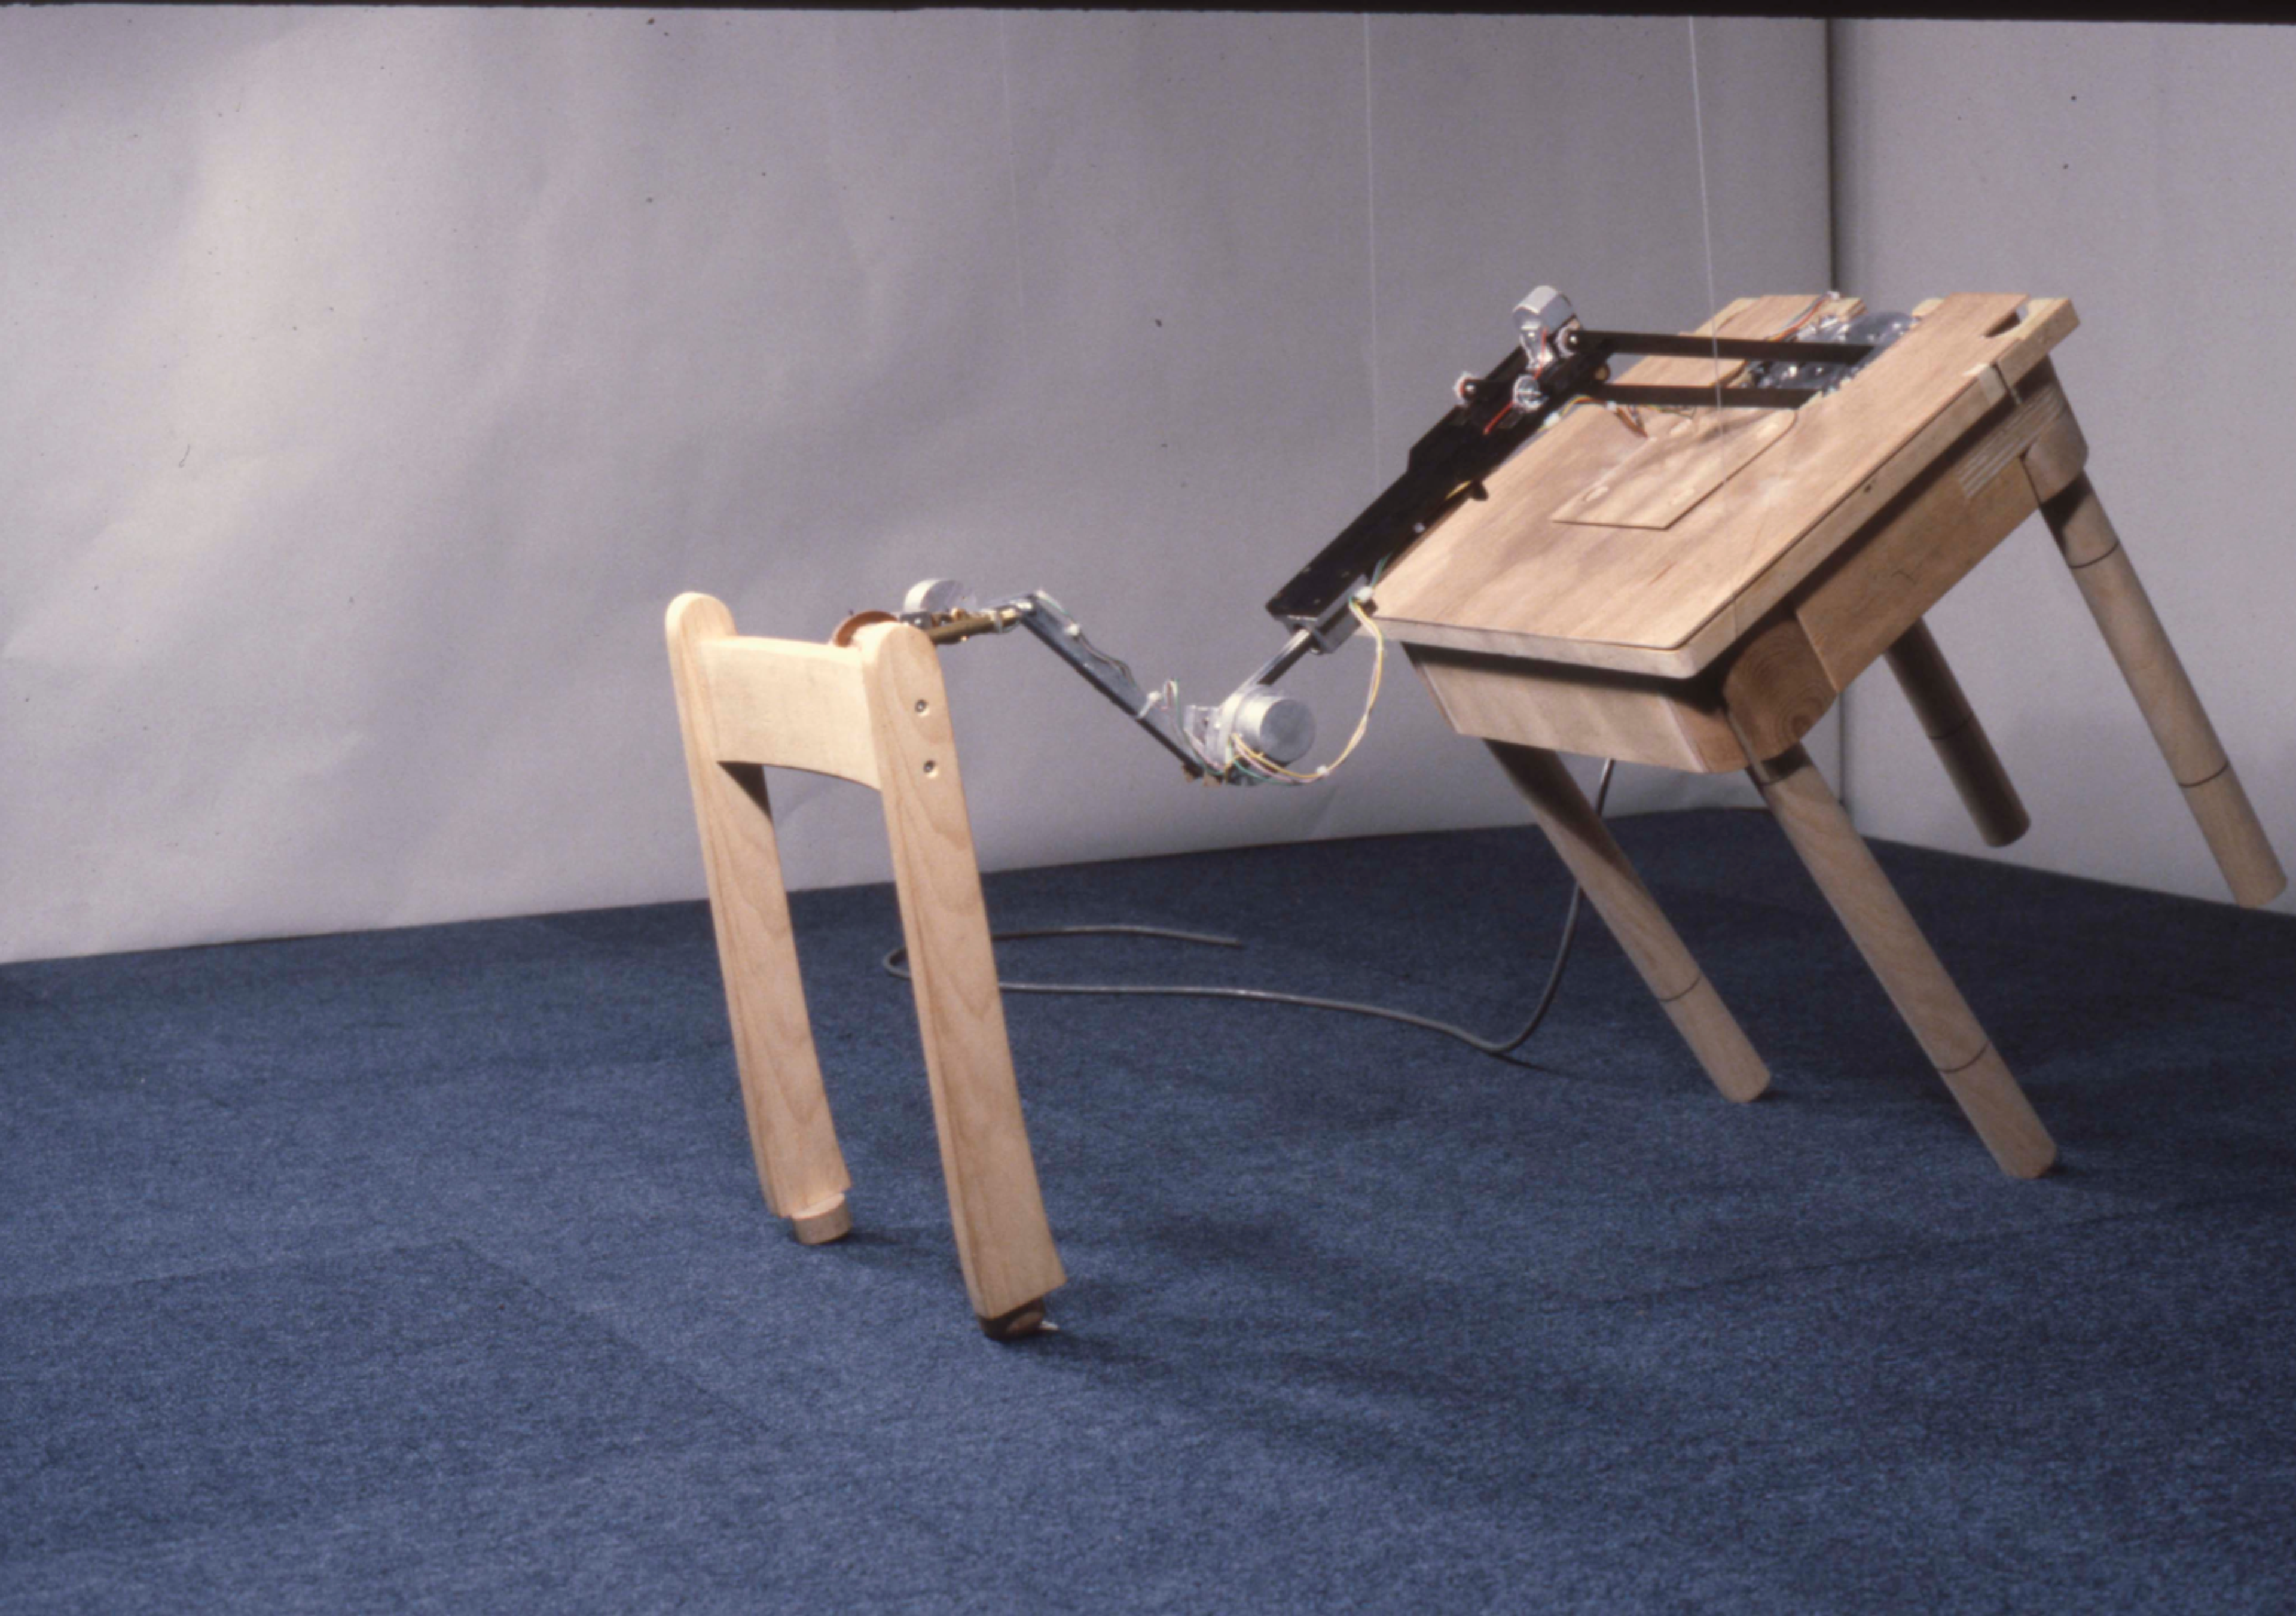 Parts of a wooden chair connected by mechanical arm